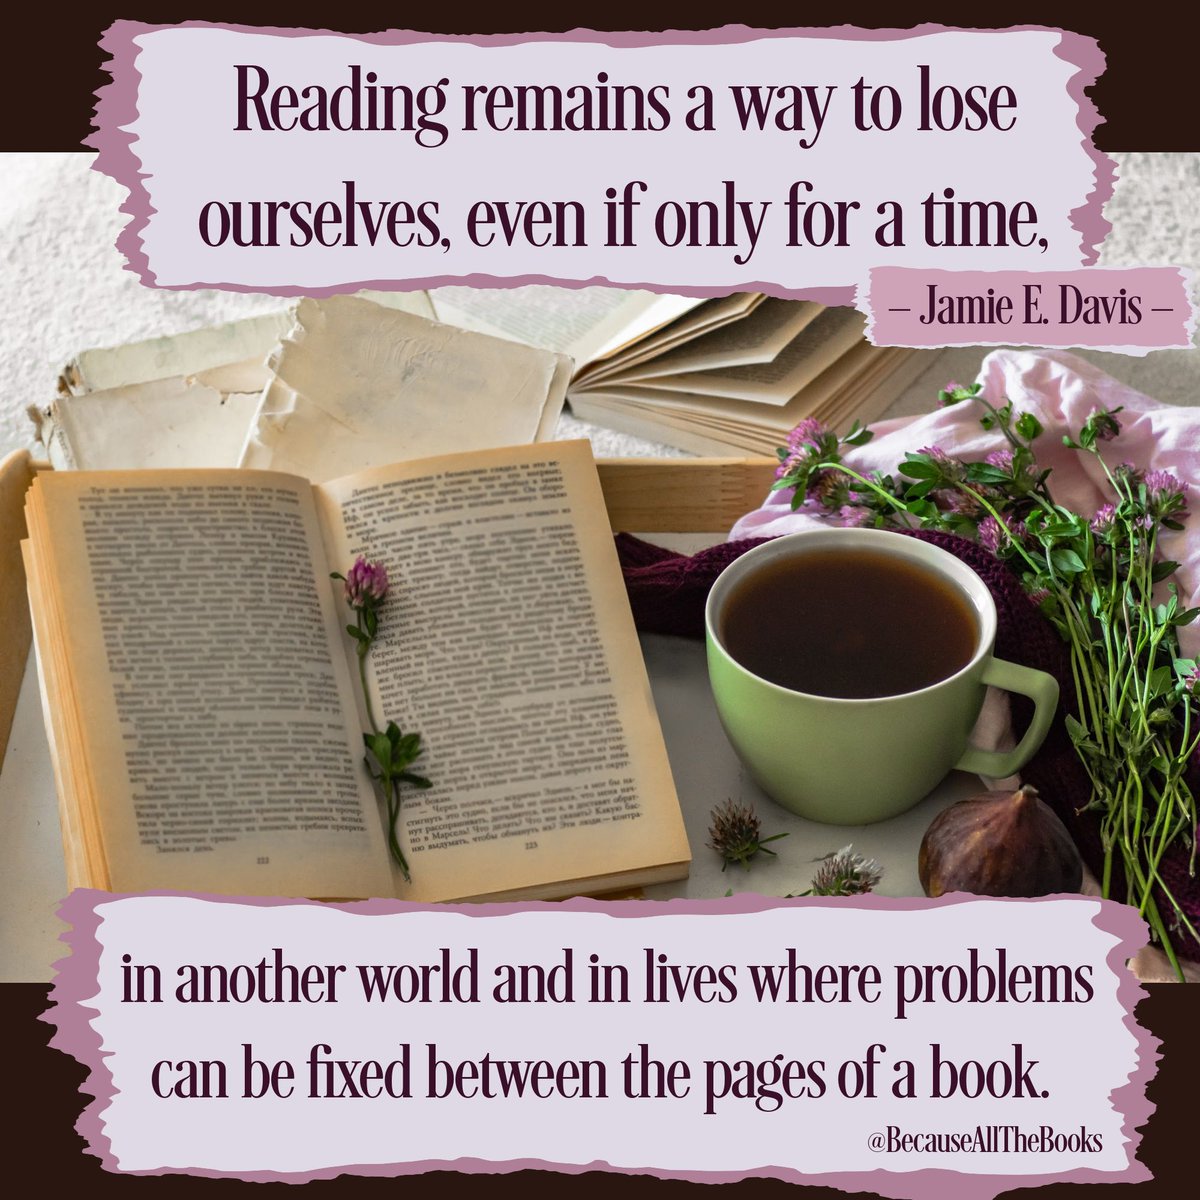 My favorite way to spend time. How about you? susanbaganz.com #ilovereading #greatbooks #inspirationalromance